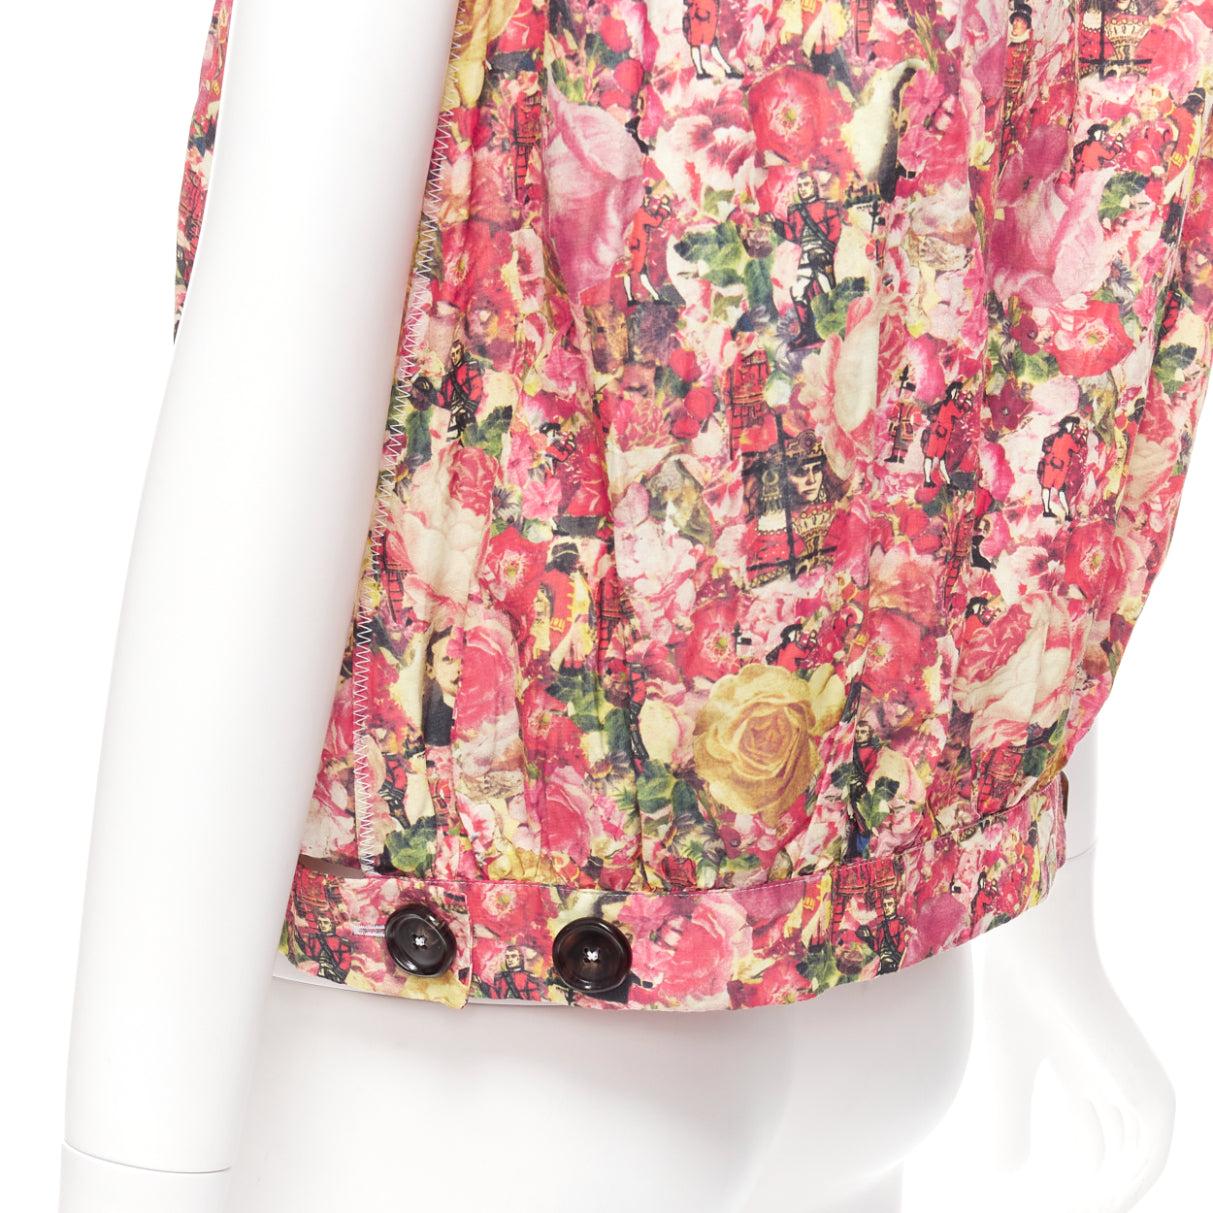 MARNI pink green floral print black button boxy vest top IT38 XS
Reference: CELG/A00317
Brand: Marni
Material: Polyamide, Blend
Color: Green, Pink
Pattern: Floral
Closure: Button
Made in: Italy

CONDITION:
Condition: Excellent, this item was